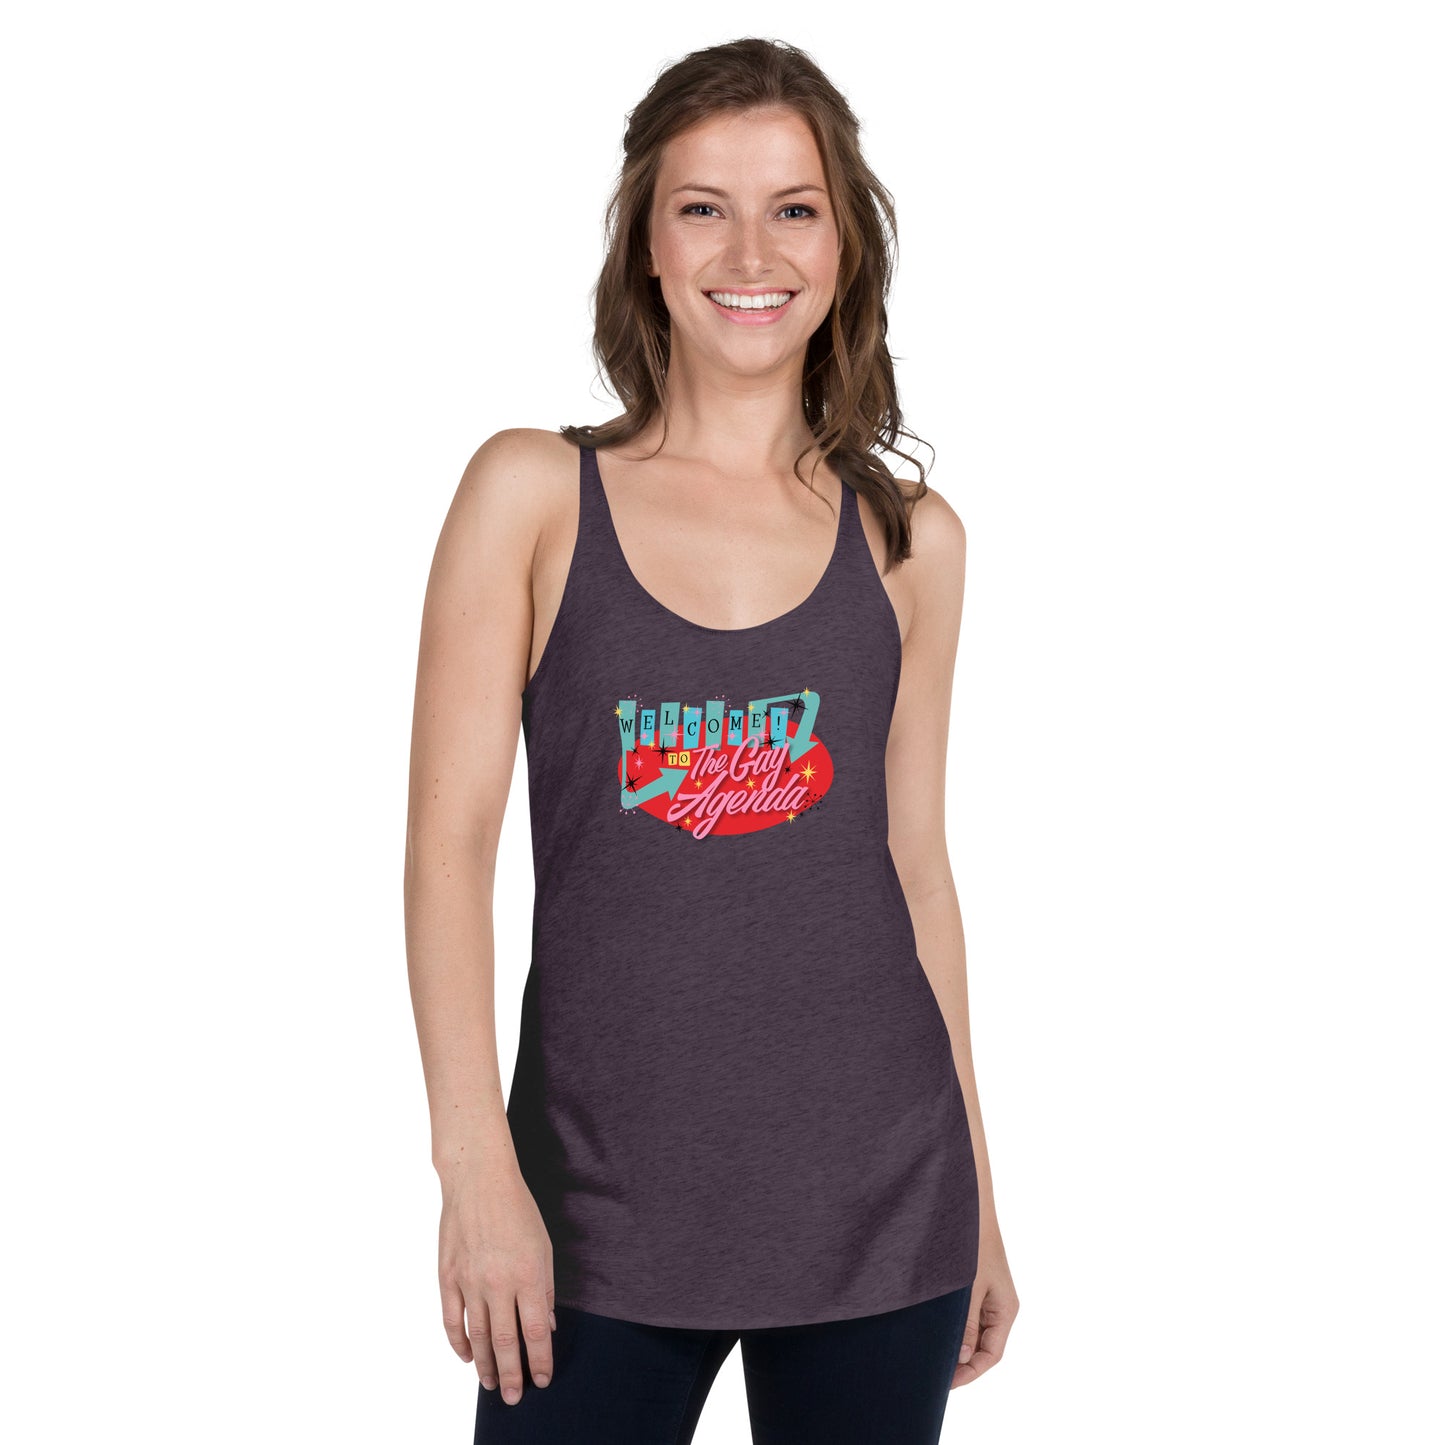 Welcome To The Gay Agenda - Women's Racerback Tank